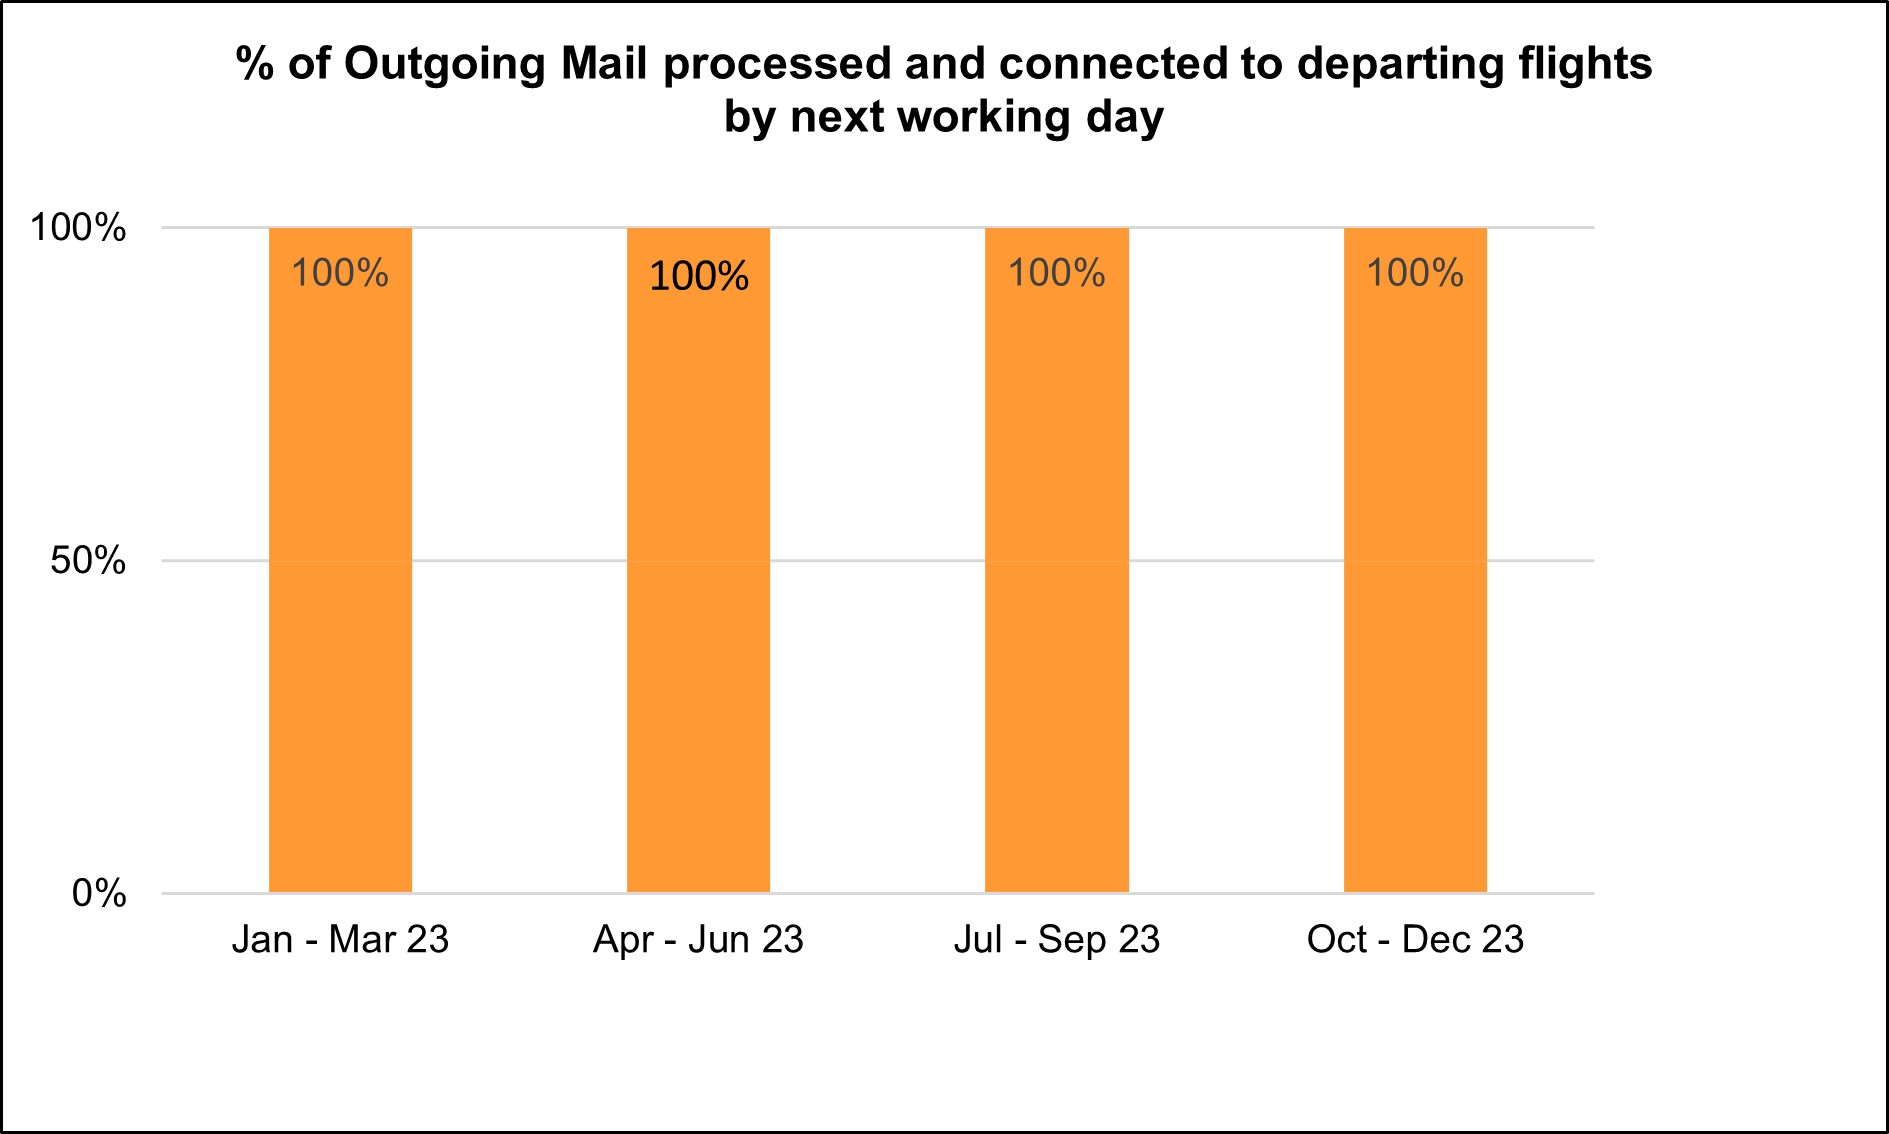 Percentage of outgoing mail processed and connected to departing flights by next working day